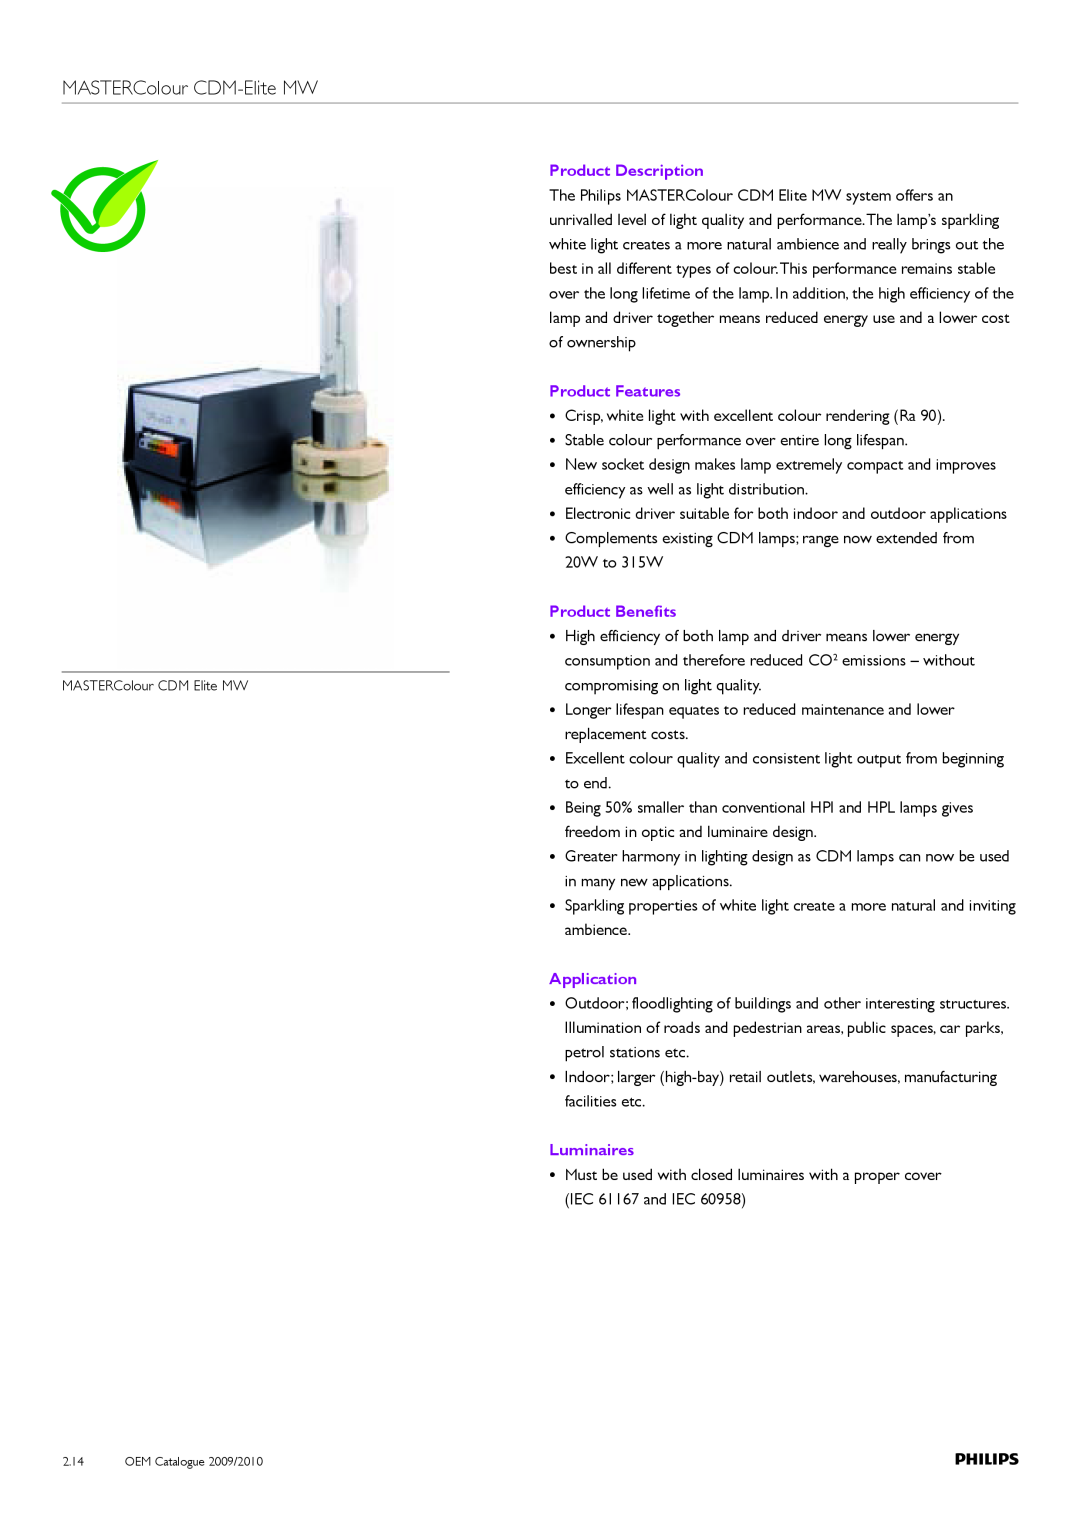 Philips Compact HID Lamp and Gear manual MASTERColour CDM-EliteMW, Product Description, Product Features, Product Benefits 